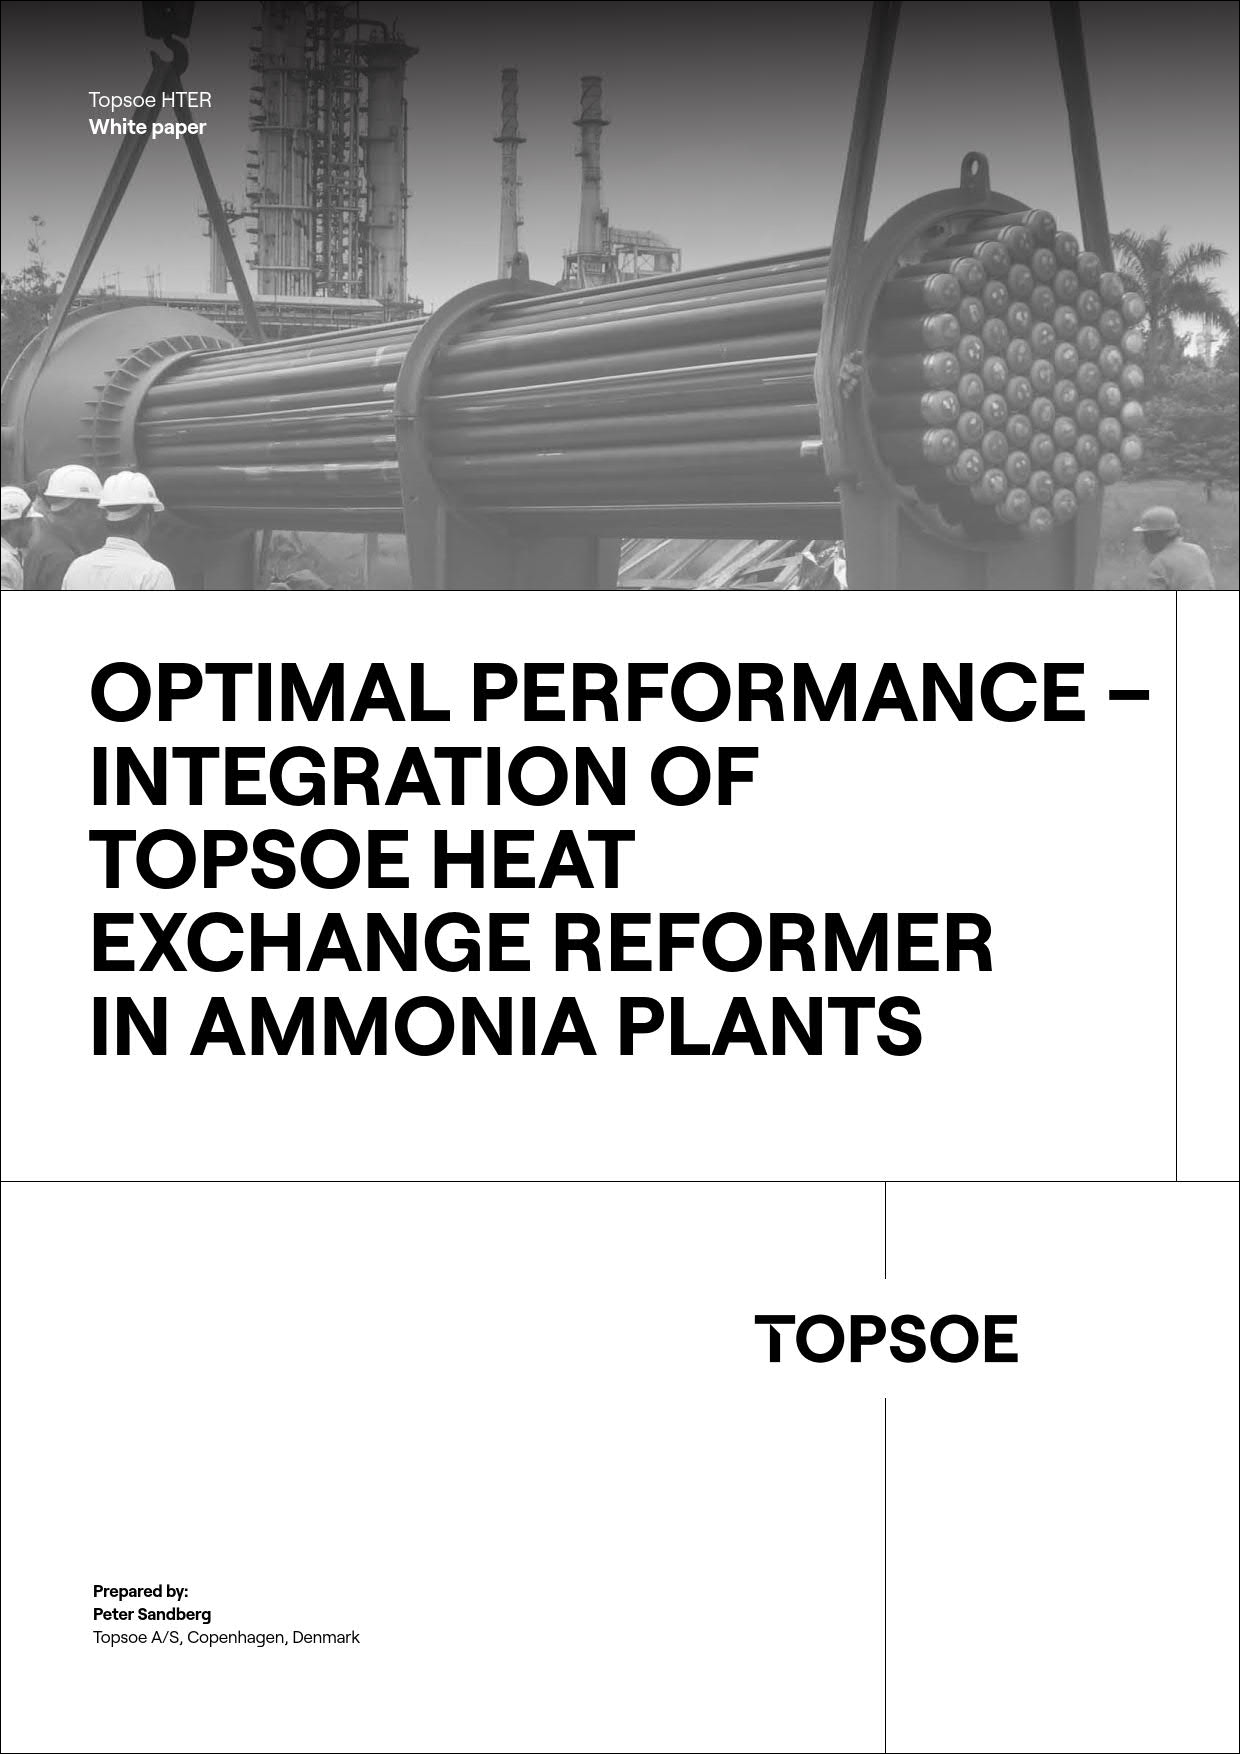 Integration of our Heat Exchange Reformer in ammonia plants